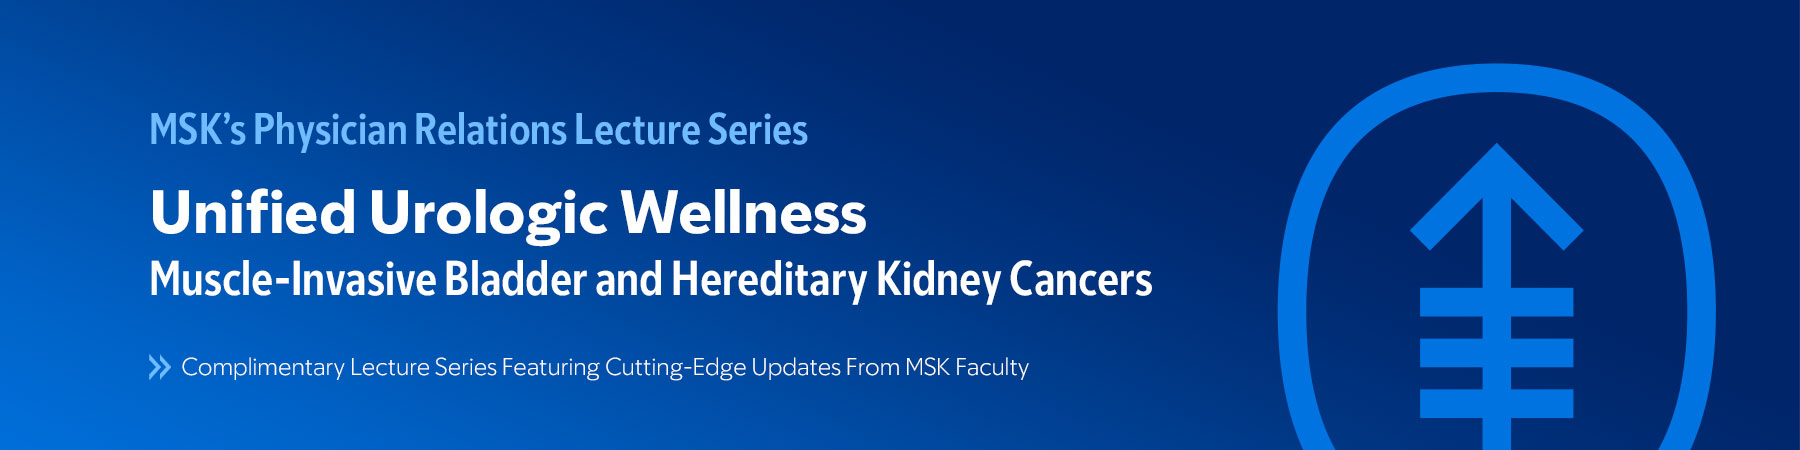 Unified Urologic Wellness: Muscle-Invasive Bladder and Hereditary Kidney Cancers Banner